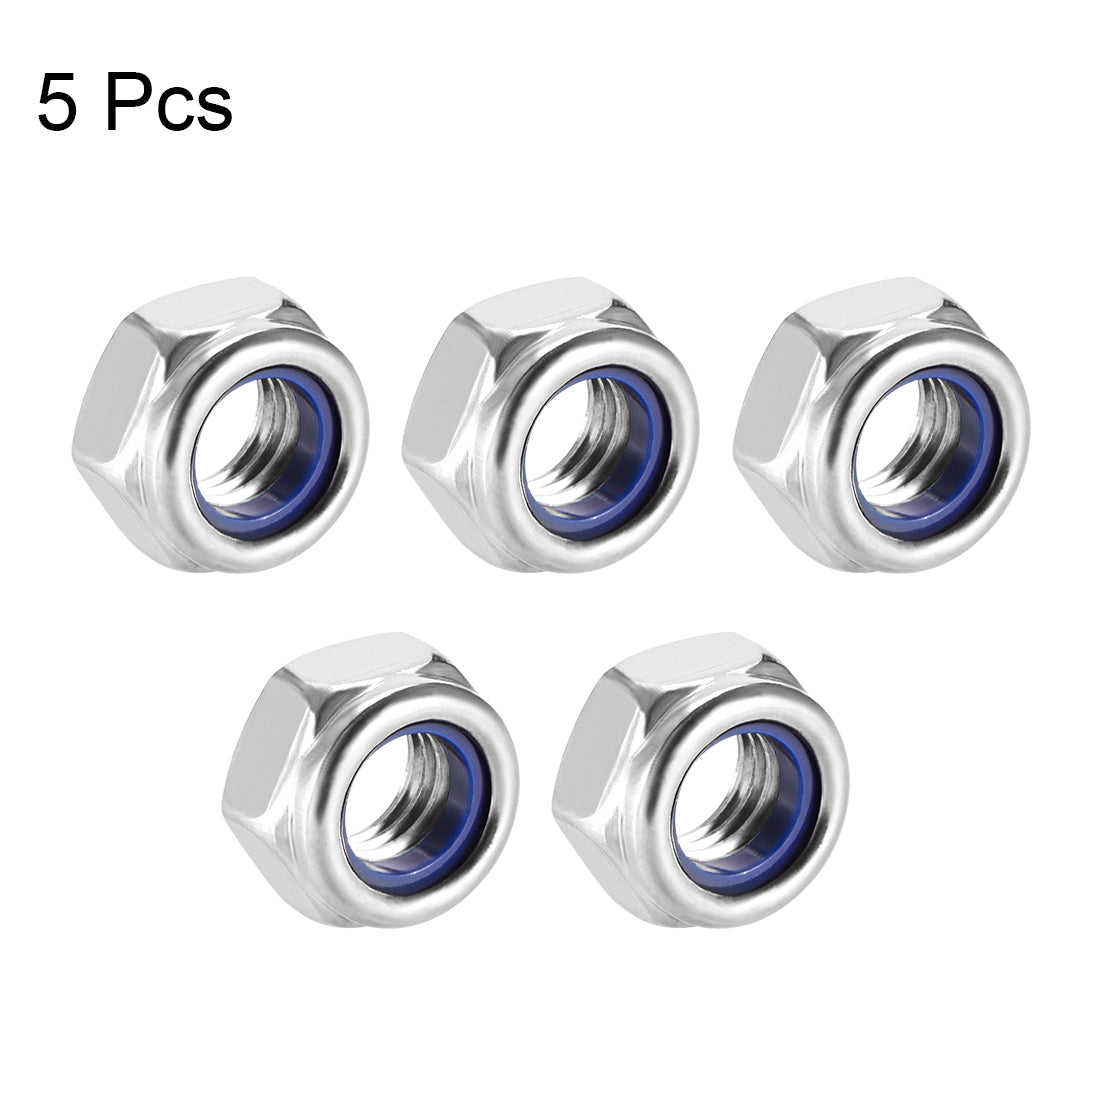 uxcell Uxcell M8x1.25mm Hex Lock Nuts Stainless Steel Nylon Insert Self-Lock Nuts, 5Pcs Silver